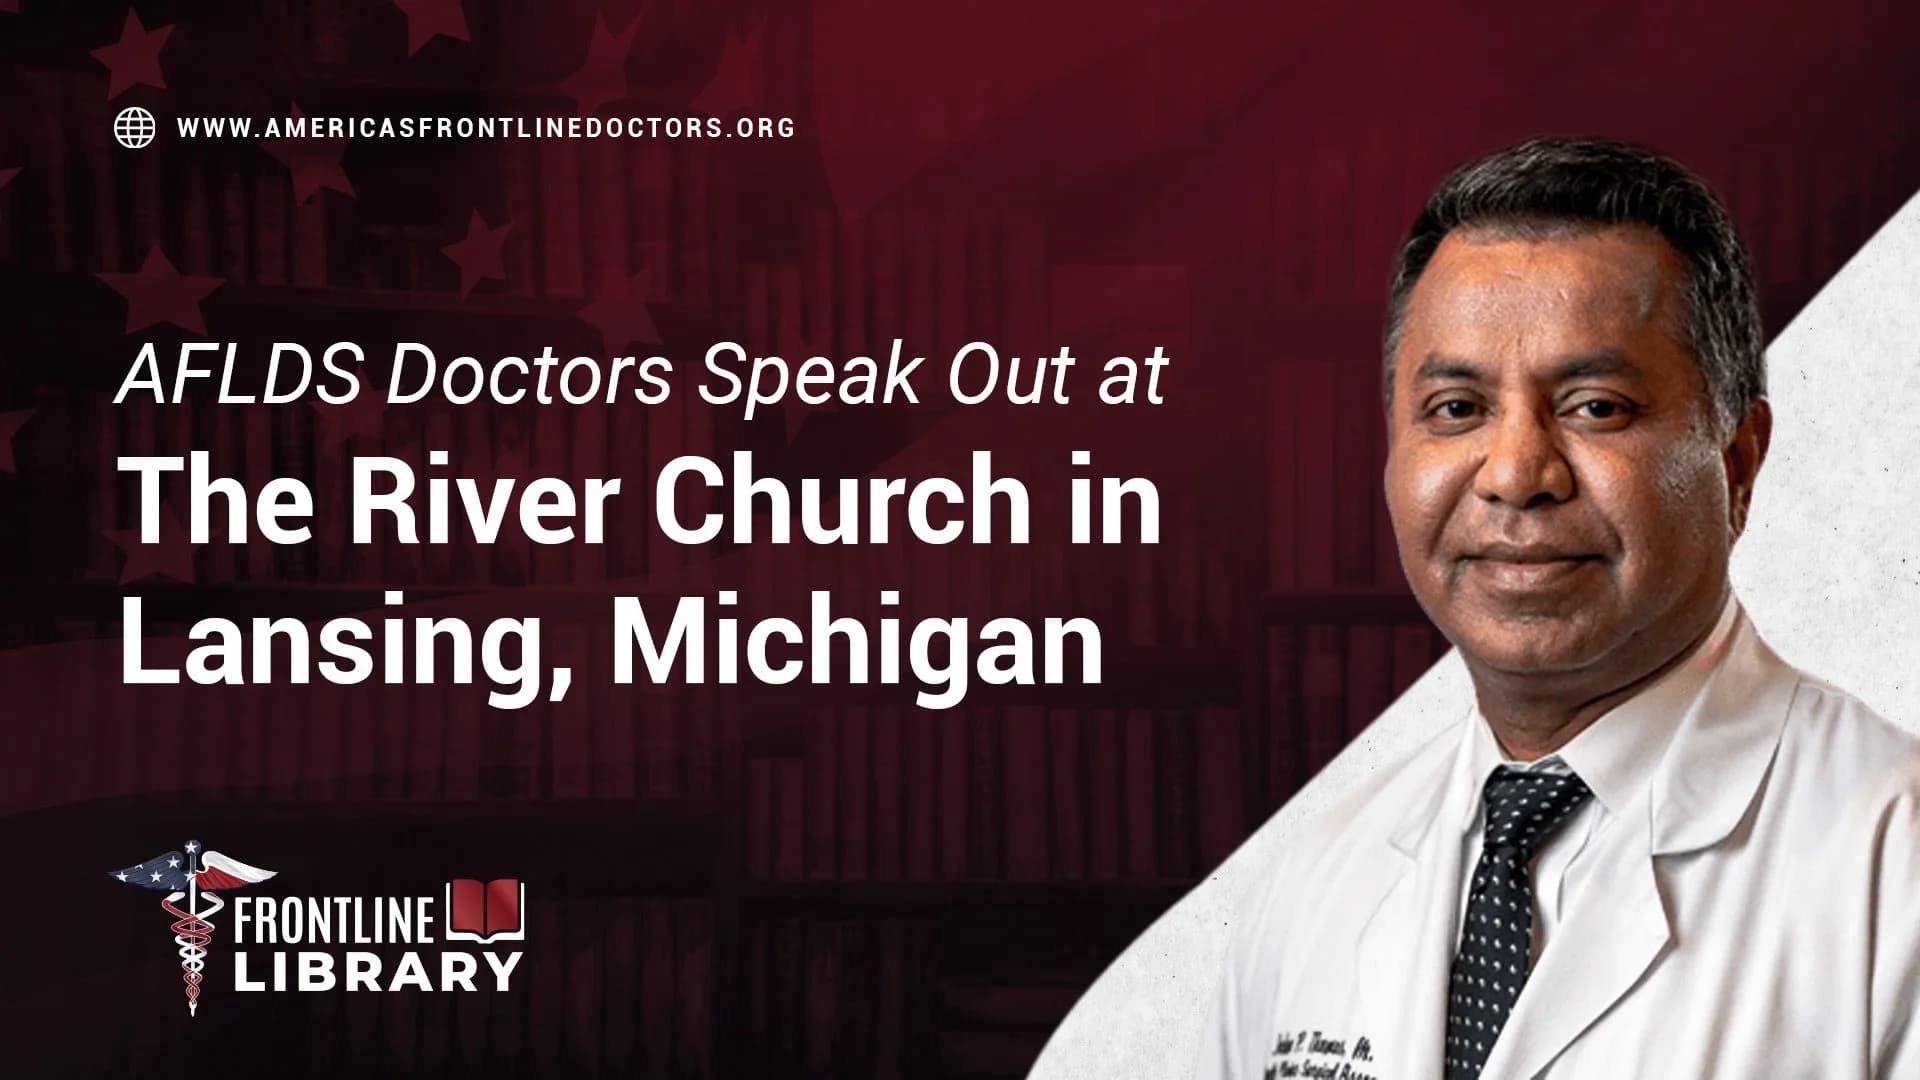 AFLDS Doctors Speak Out at The River Church in Lansing, Michigan  